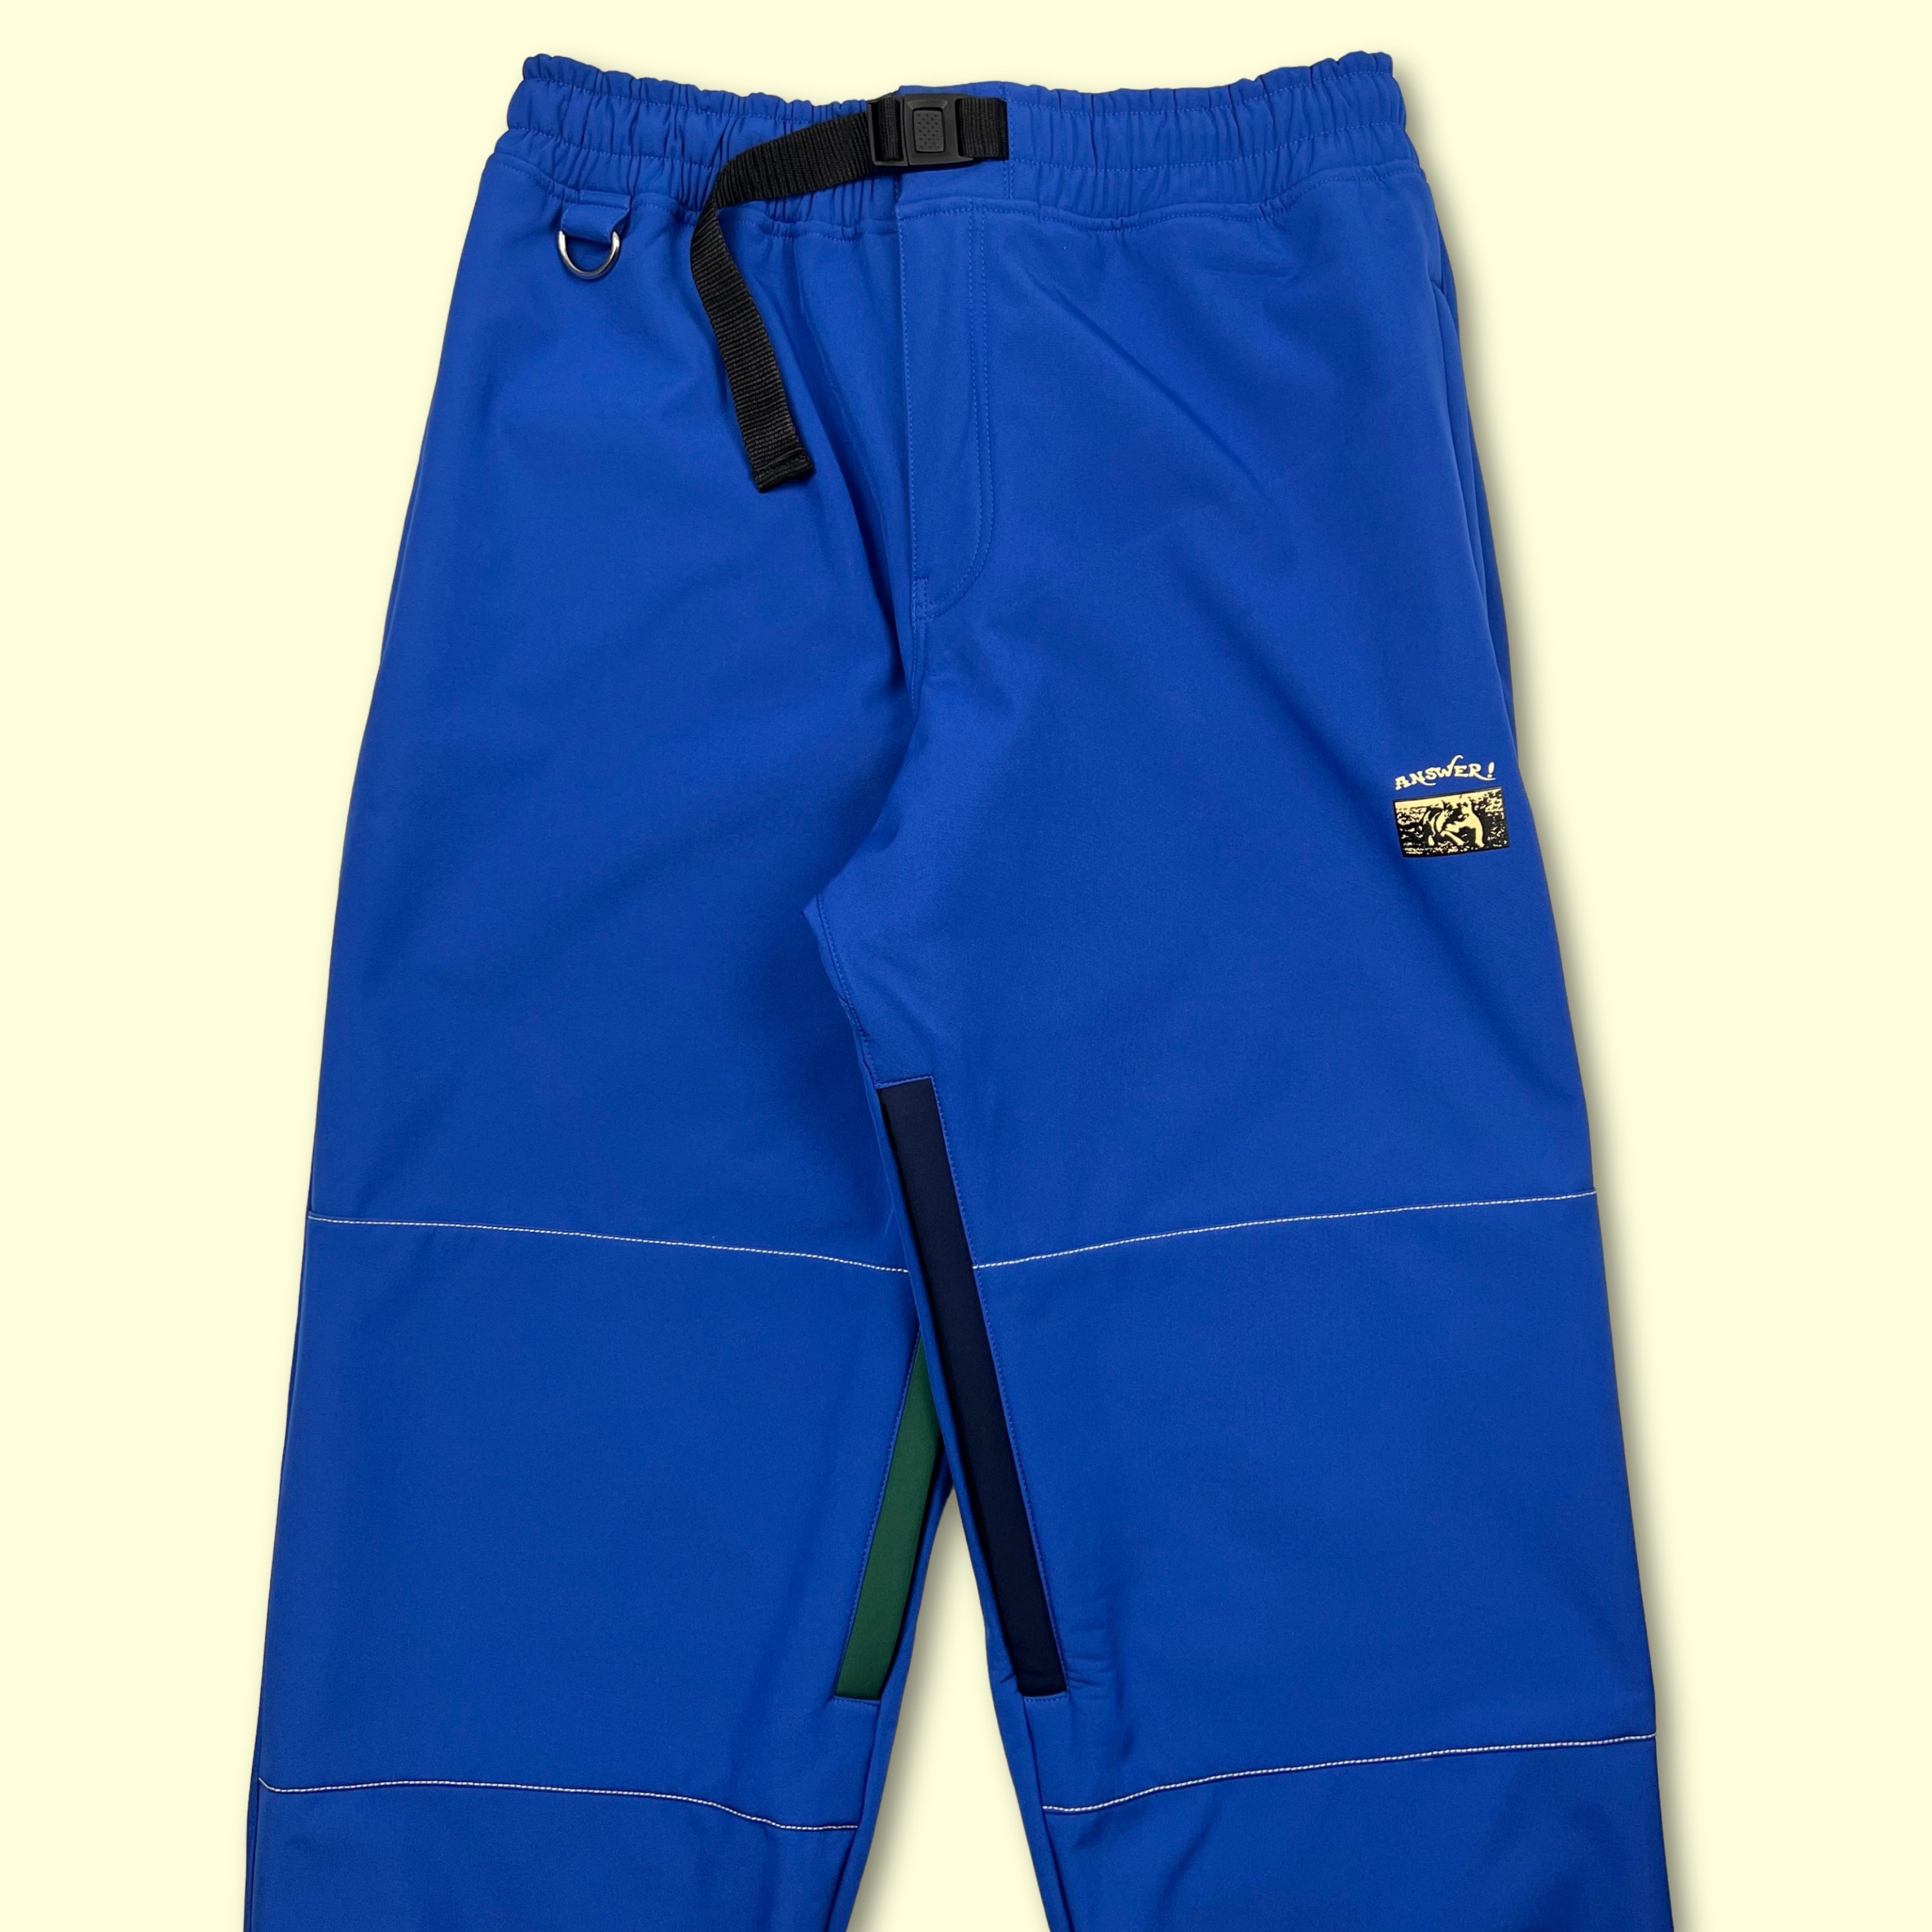 Answer Pants (Challenger Blue)